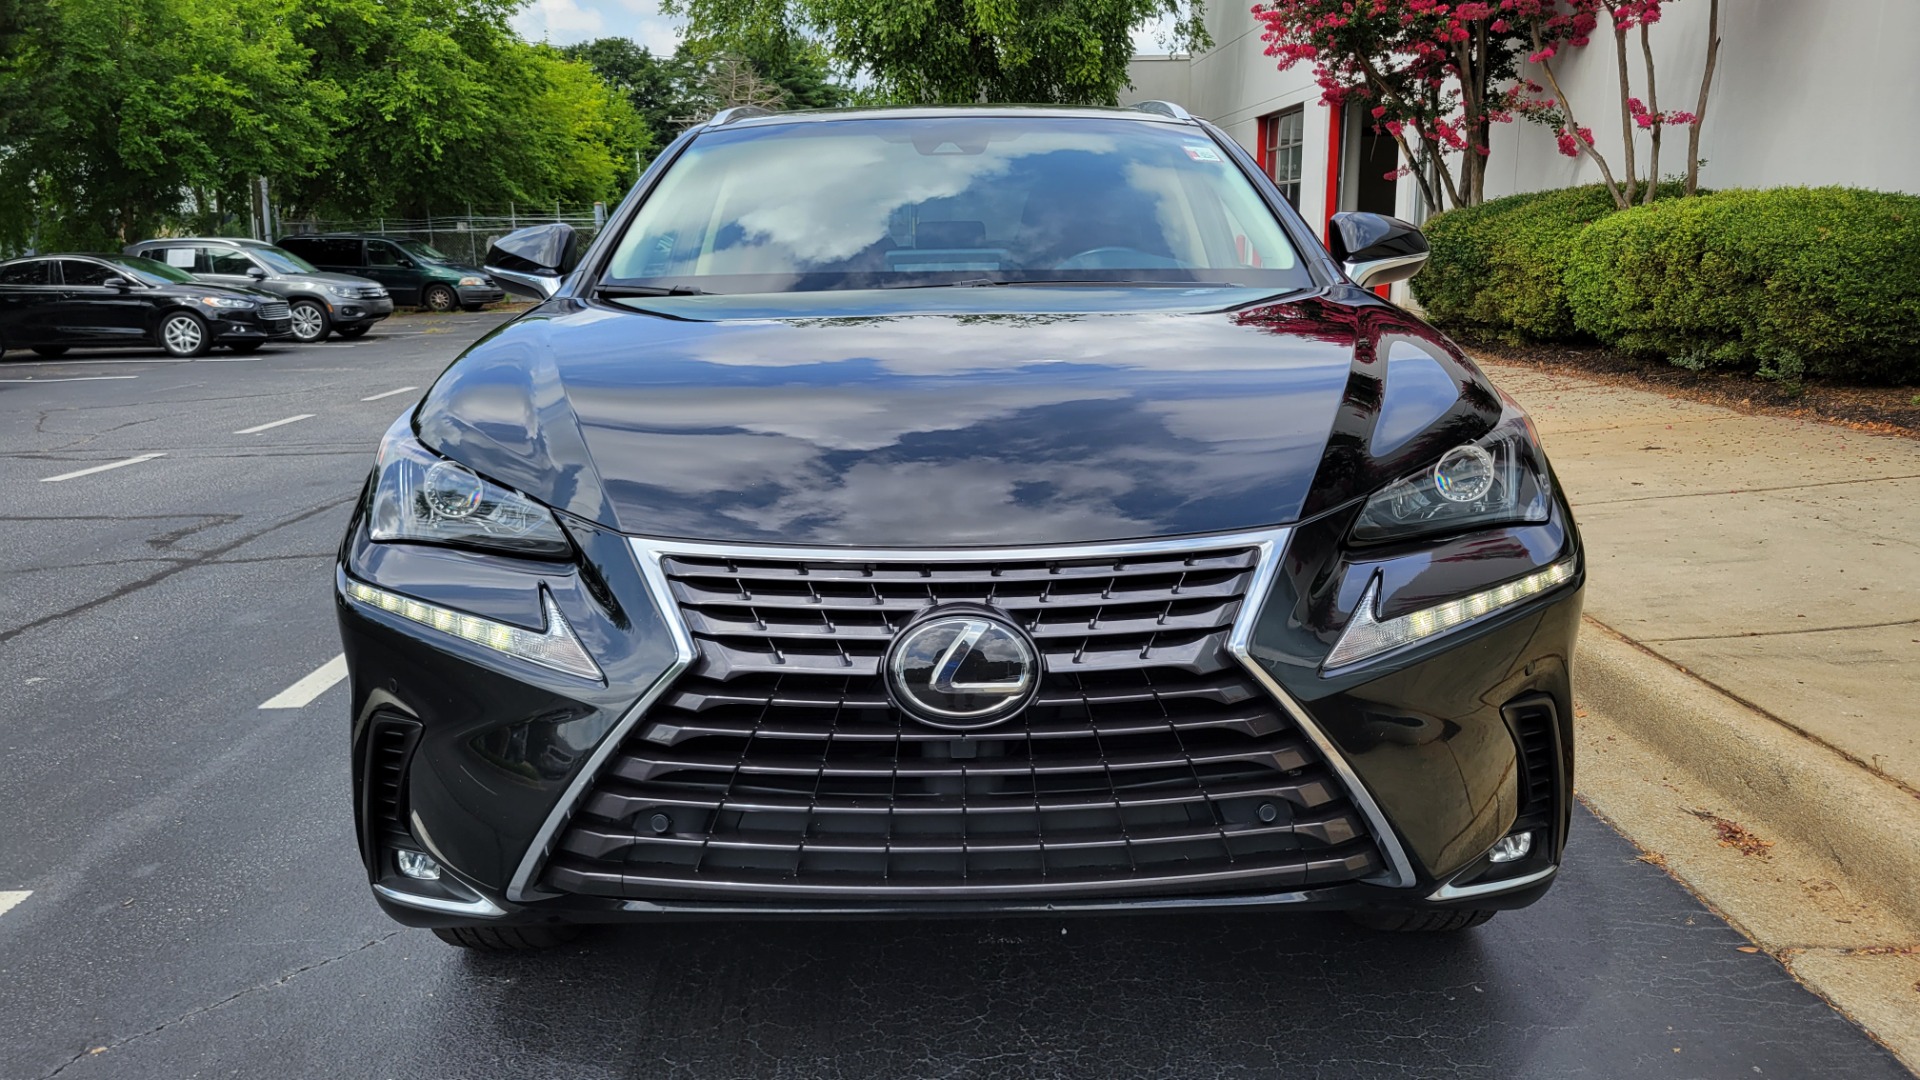 Used 2019 Lexus NX 300 / 2.0L TURBO / AUTO / SUNROOF / VENTILATED SEATS / CAMERA for sale Sold at Formula Imports in Charlotte NC 28227 21